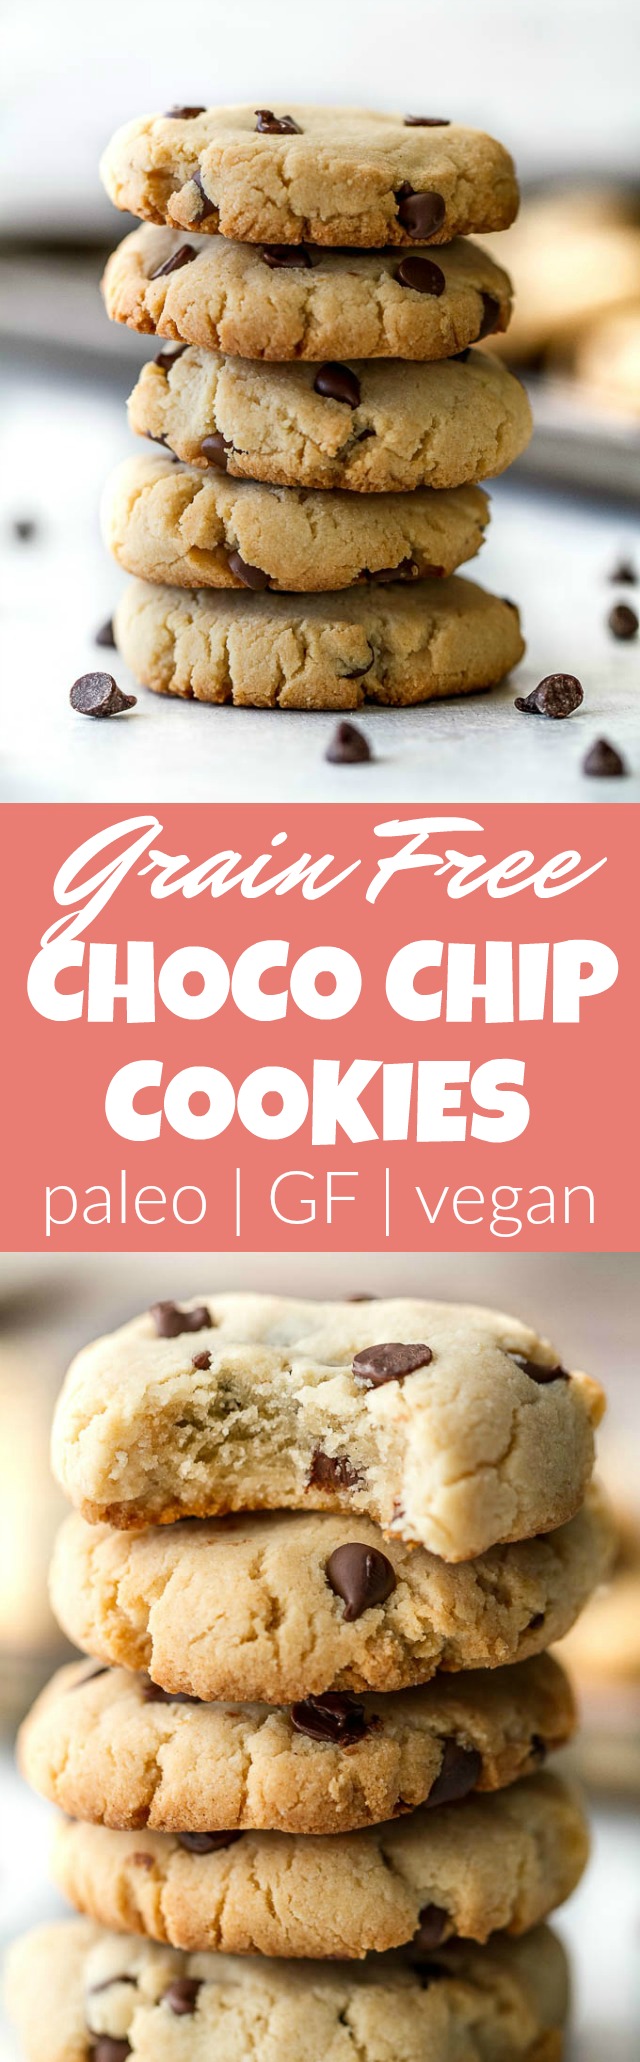 These Grain Free Vegan Chocolate Chip Cookies have the same texture and taste as a classic chocolate chip cookie, but are made without flour, butter, eggs, or refined sugar! | runningwithspoons.com #paleo #vegan #glutenfree #recipe